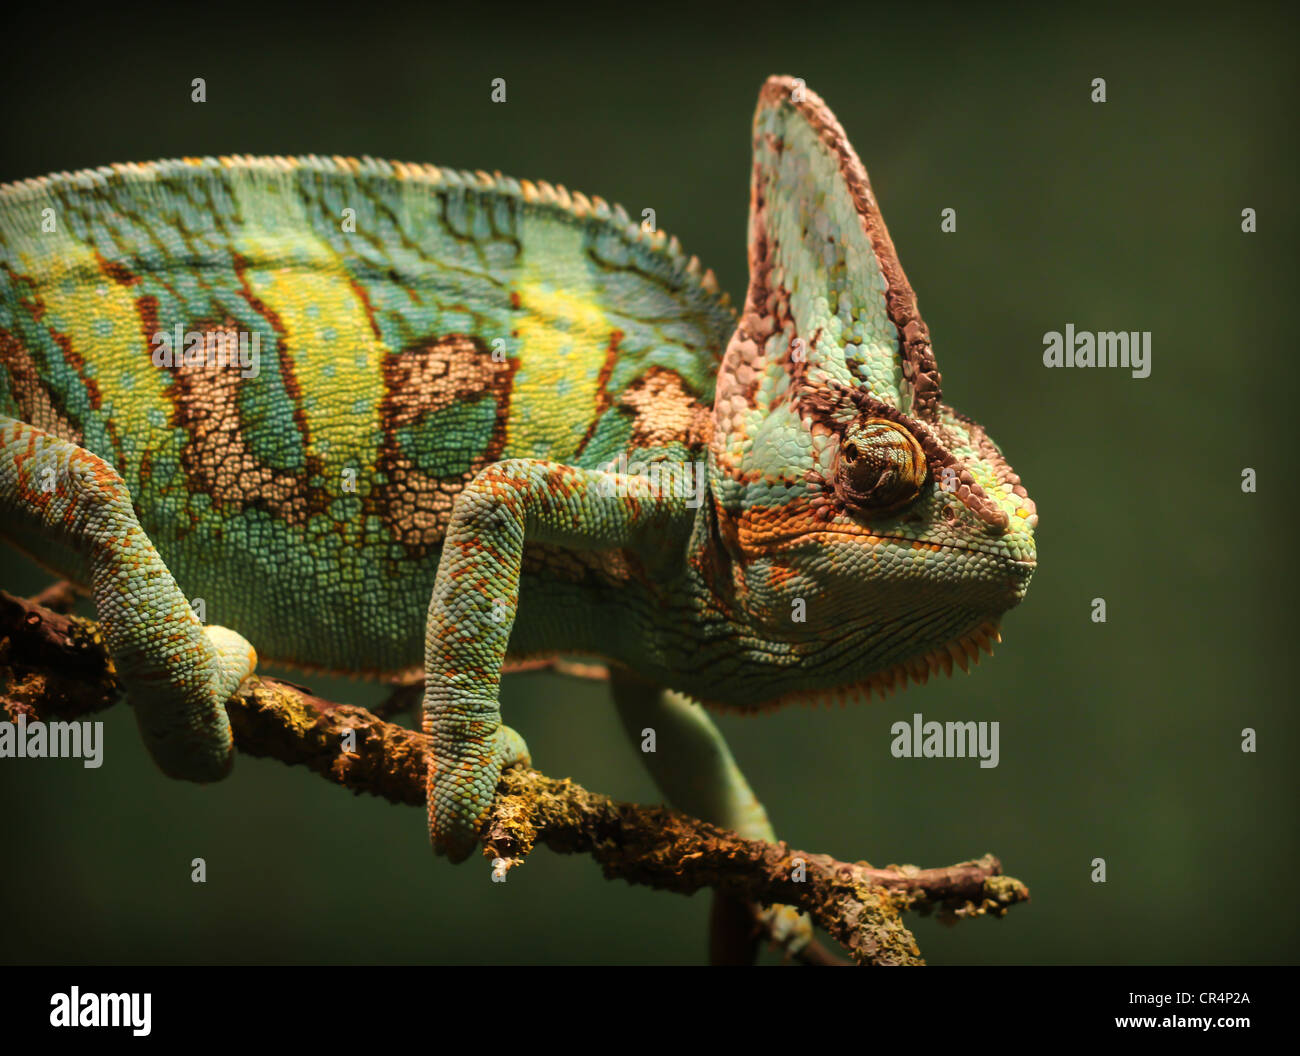 A veiled chameleon walking along a tree branch and looking at the camera. Stock Photo